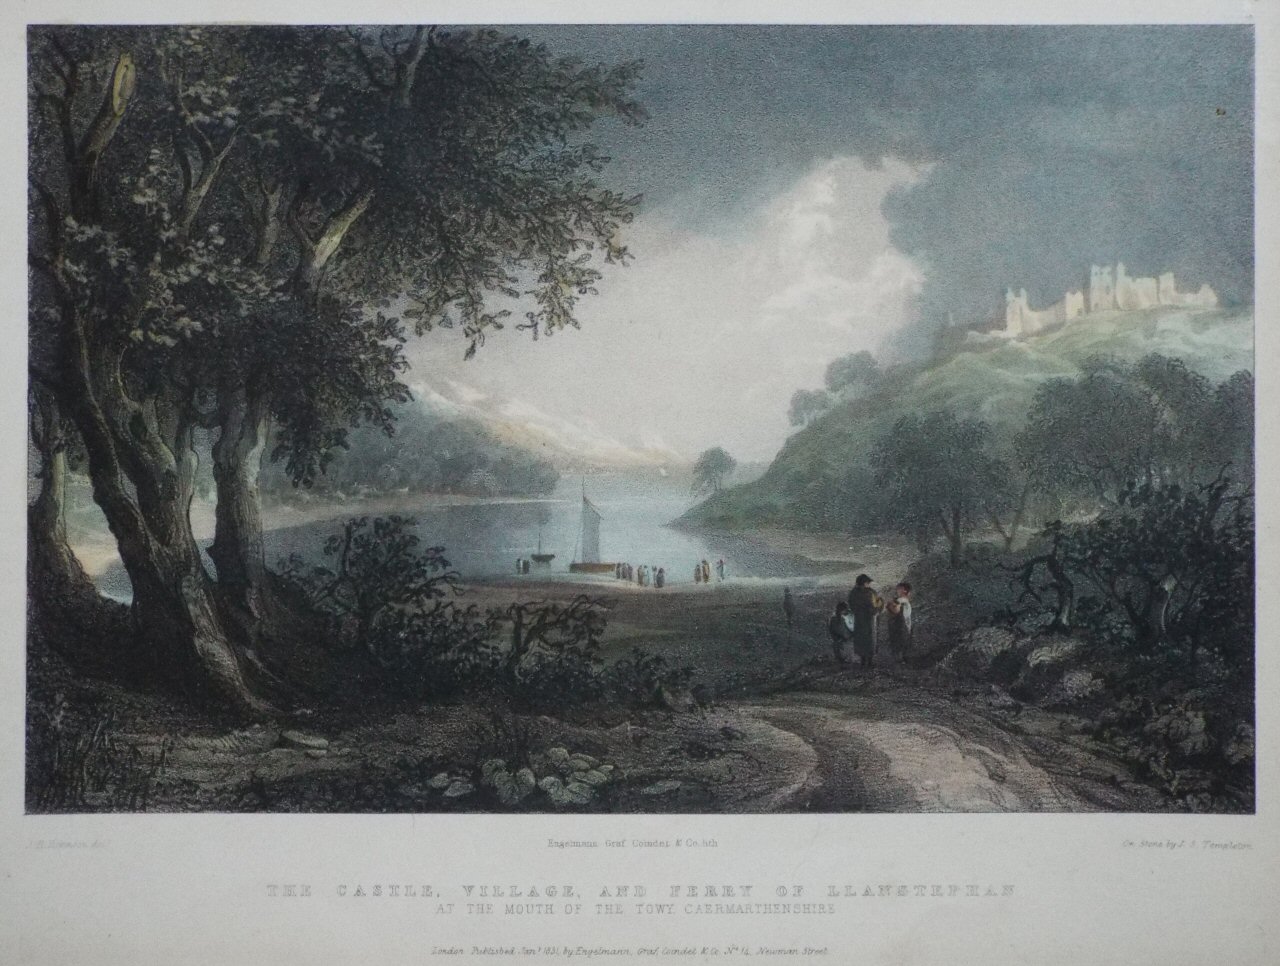 Lithograph - The Castle, Village and Ferry of Llanstephan at the Mouth of the Towy,Caermarthenshire - Templeton